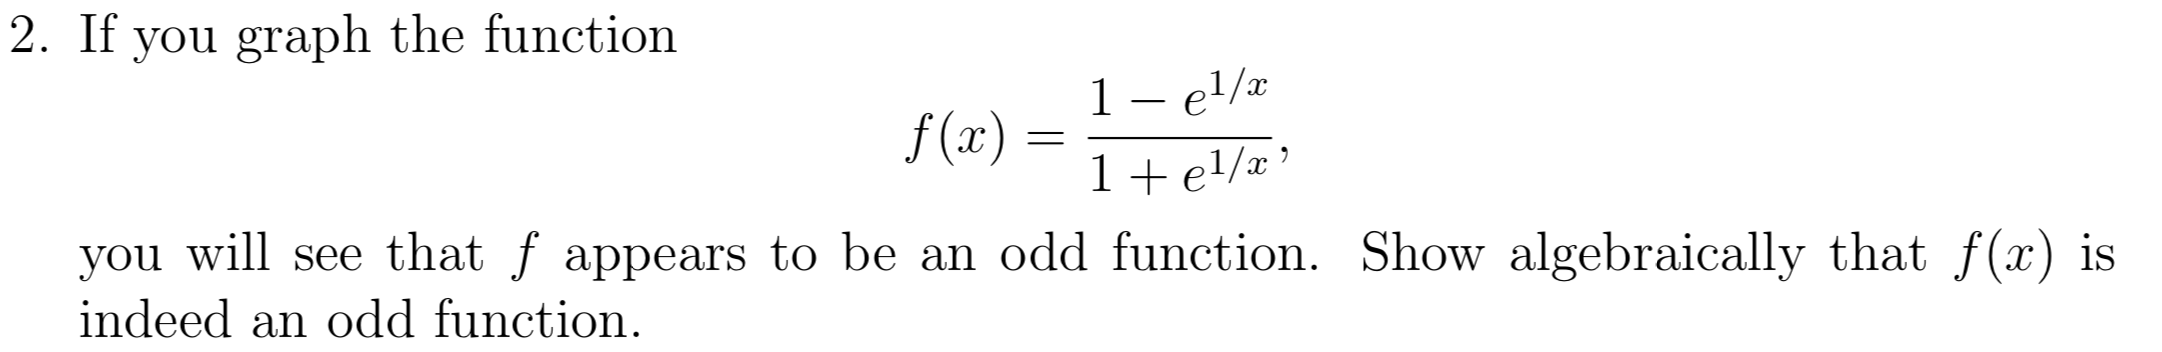 2. If you graph the function
1 - el/
x
f(x)
1+el/x
you will see that f appears to be an odd function. Show algebraically that
indeed an odd function
f(x)
is
